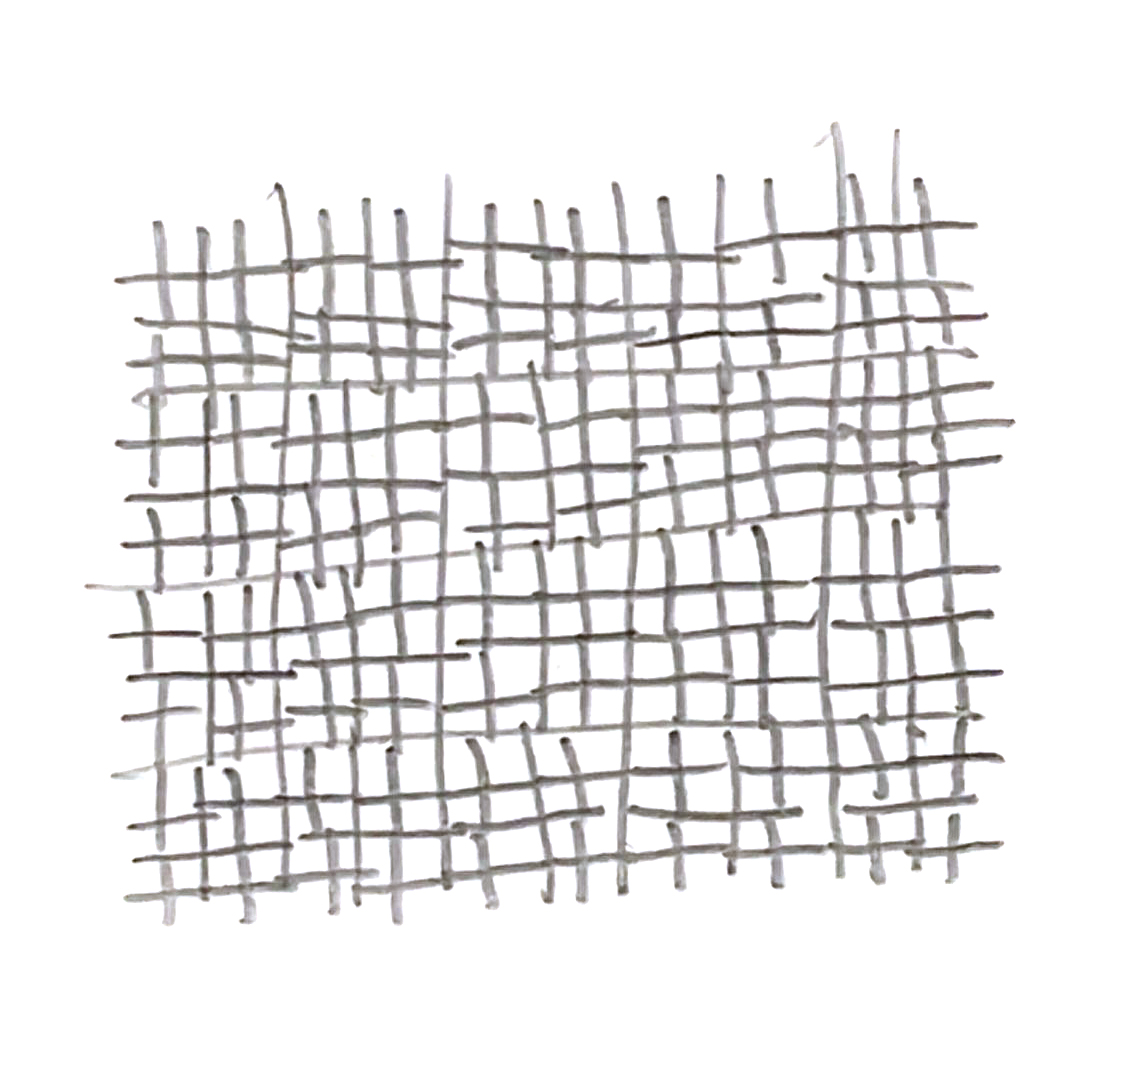 pencil sketch of a grid with smaller grids misaligned inside of it